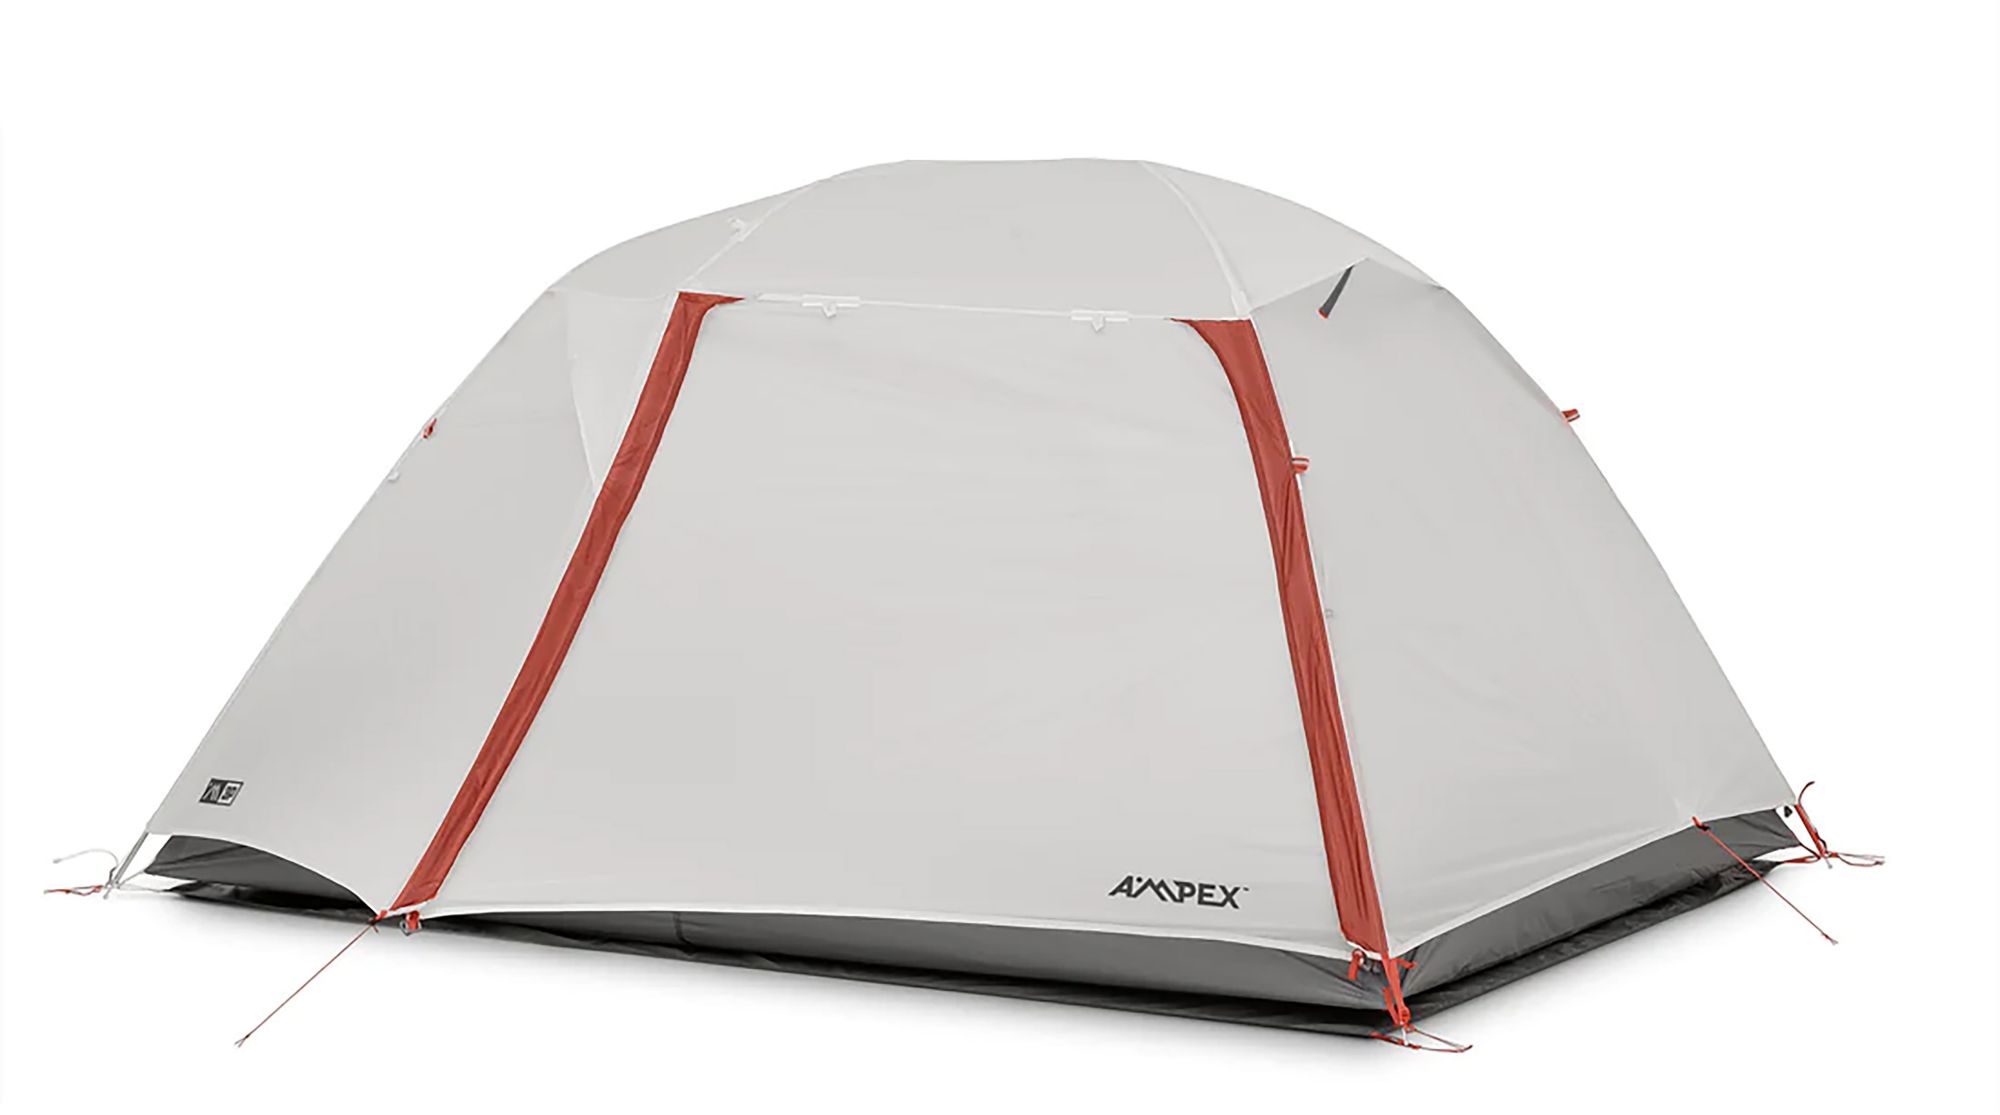 Photos - Tent AMPEX Codazzi 3 Person Backpacking , White/Red/Grey 23RDWU3PBCKPCKNGTC